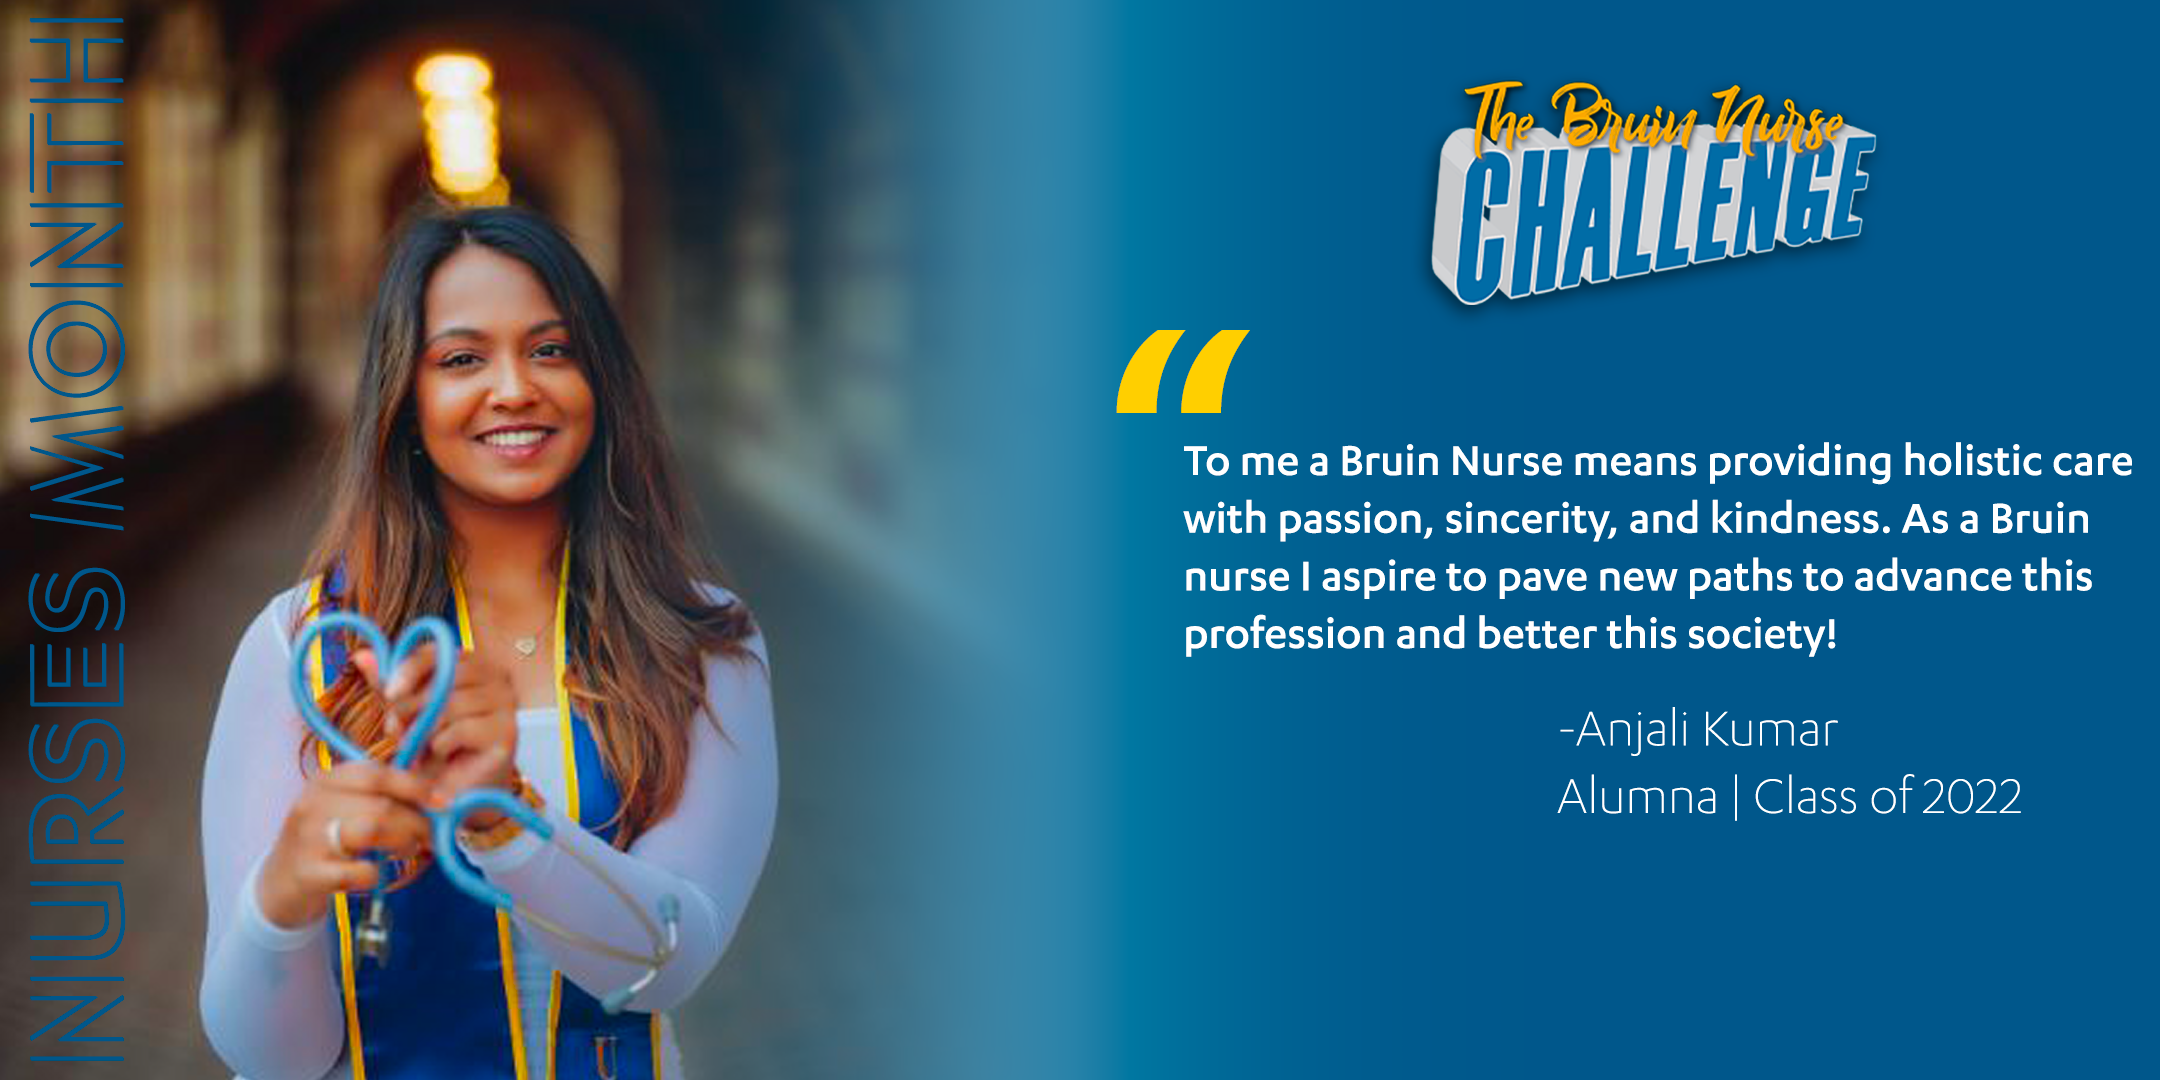 Bruin Nurse Challenge graphic featuring Anjali Kumar's quote, "To me a Bruin Nurse means providing holistic care with passion, sincerity, and kindness. As a Bruin nurse I aspire to pave new paths to advance this profession and better this society!"